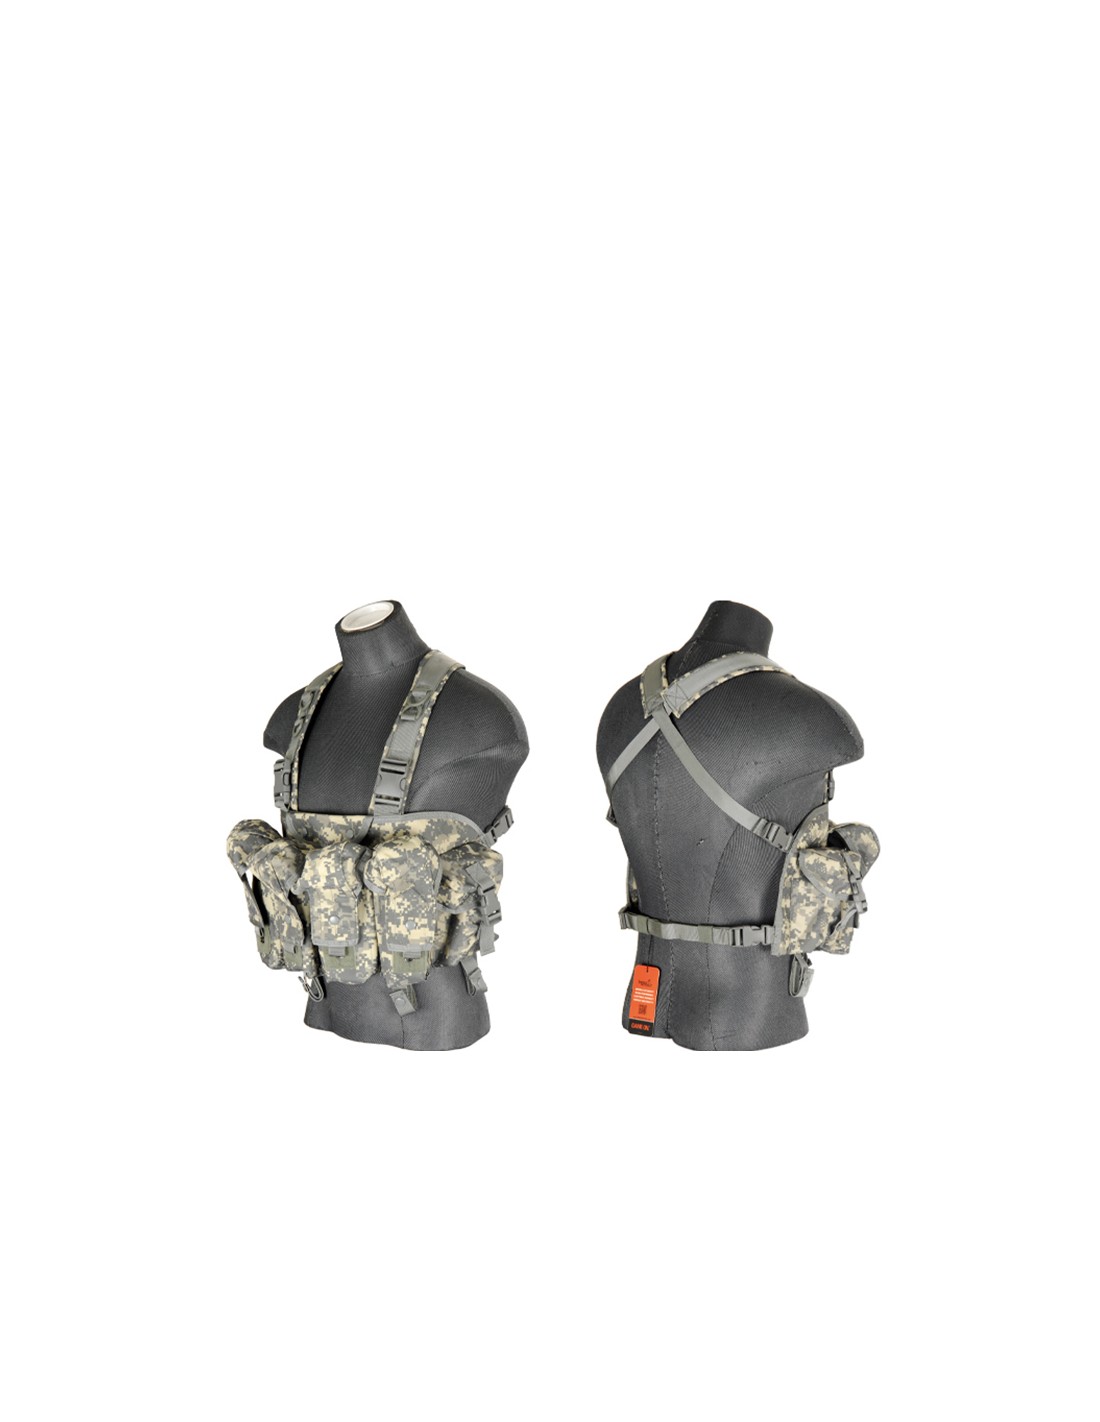 Lancer Tactical CA-308 AK Adjustable Chest Rig - Nylon, Holds 8 Mags